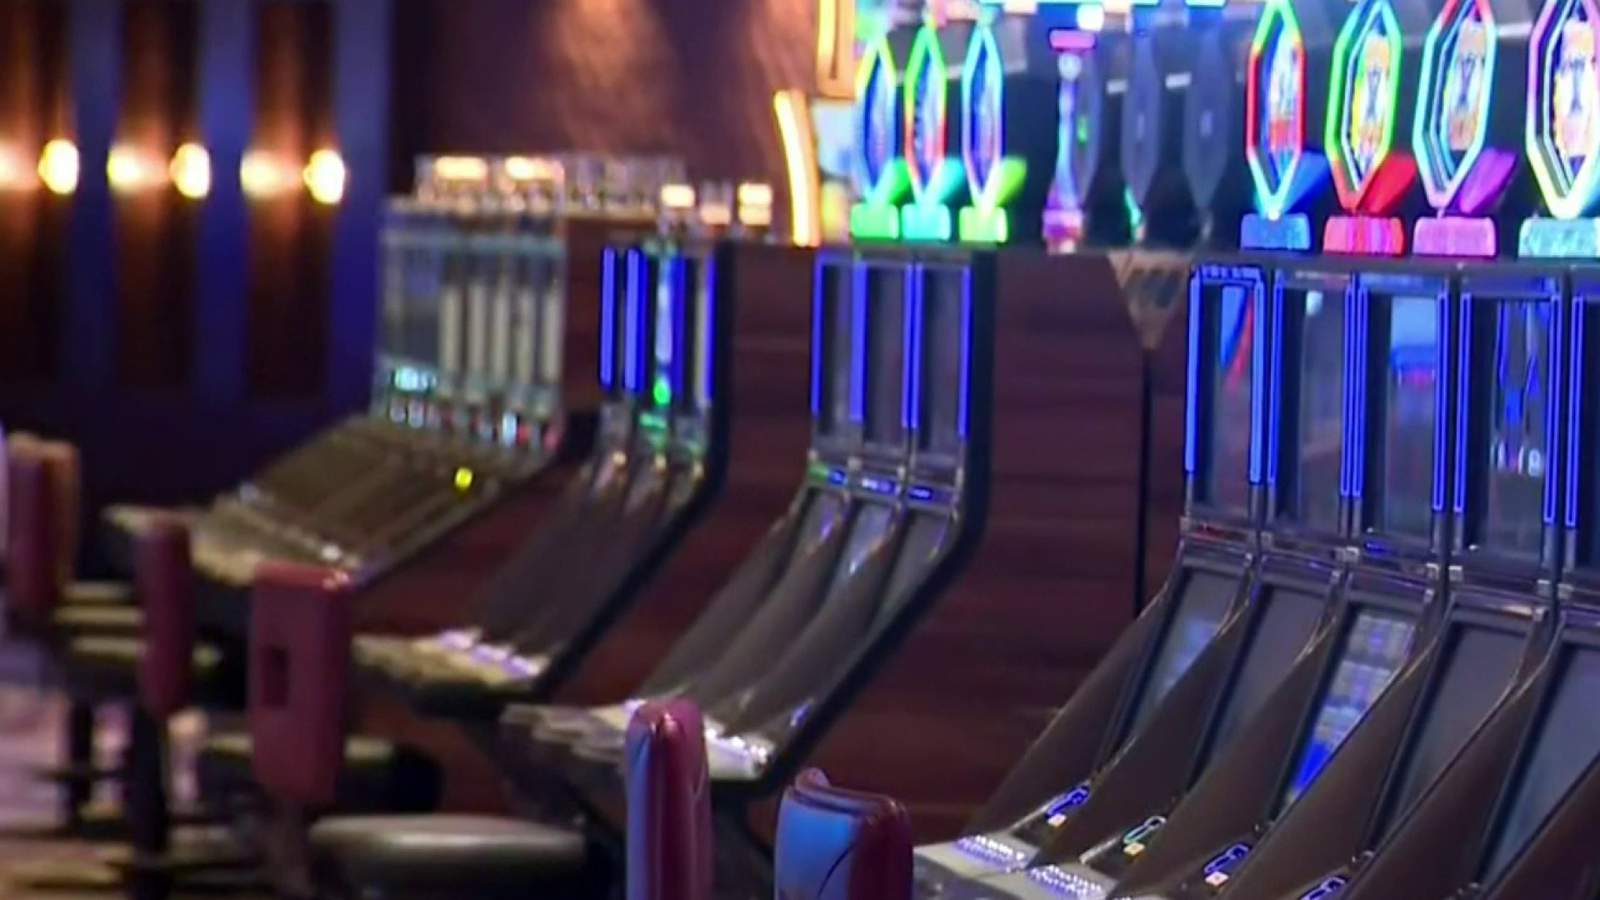 Michigan Gov. Whitmer will allow casinos to reopen at 15 percent capacity